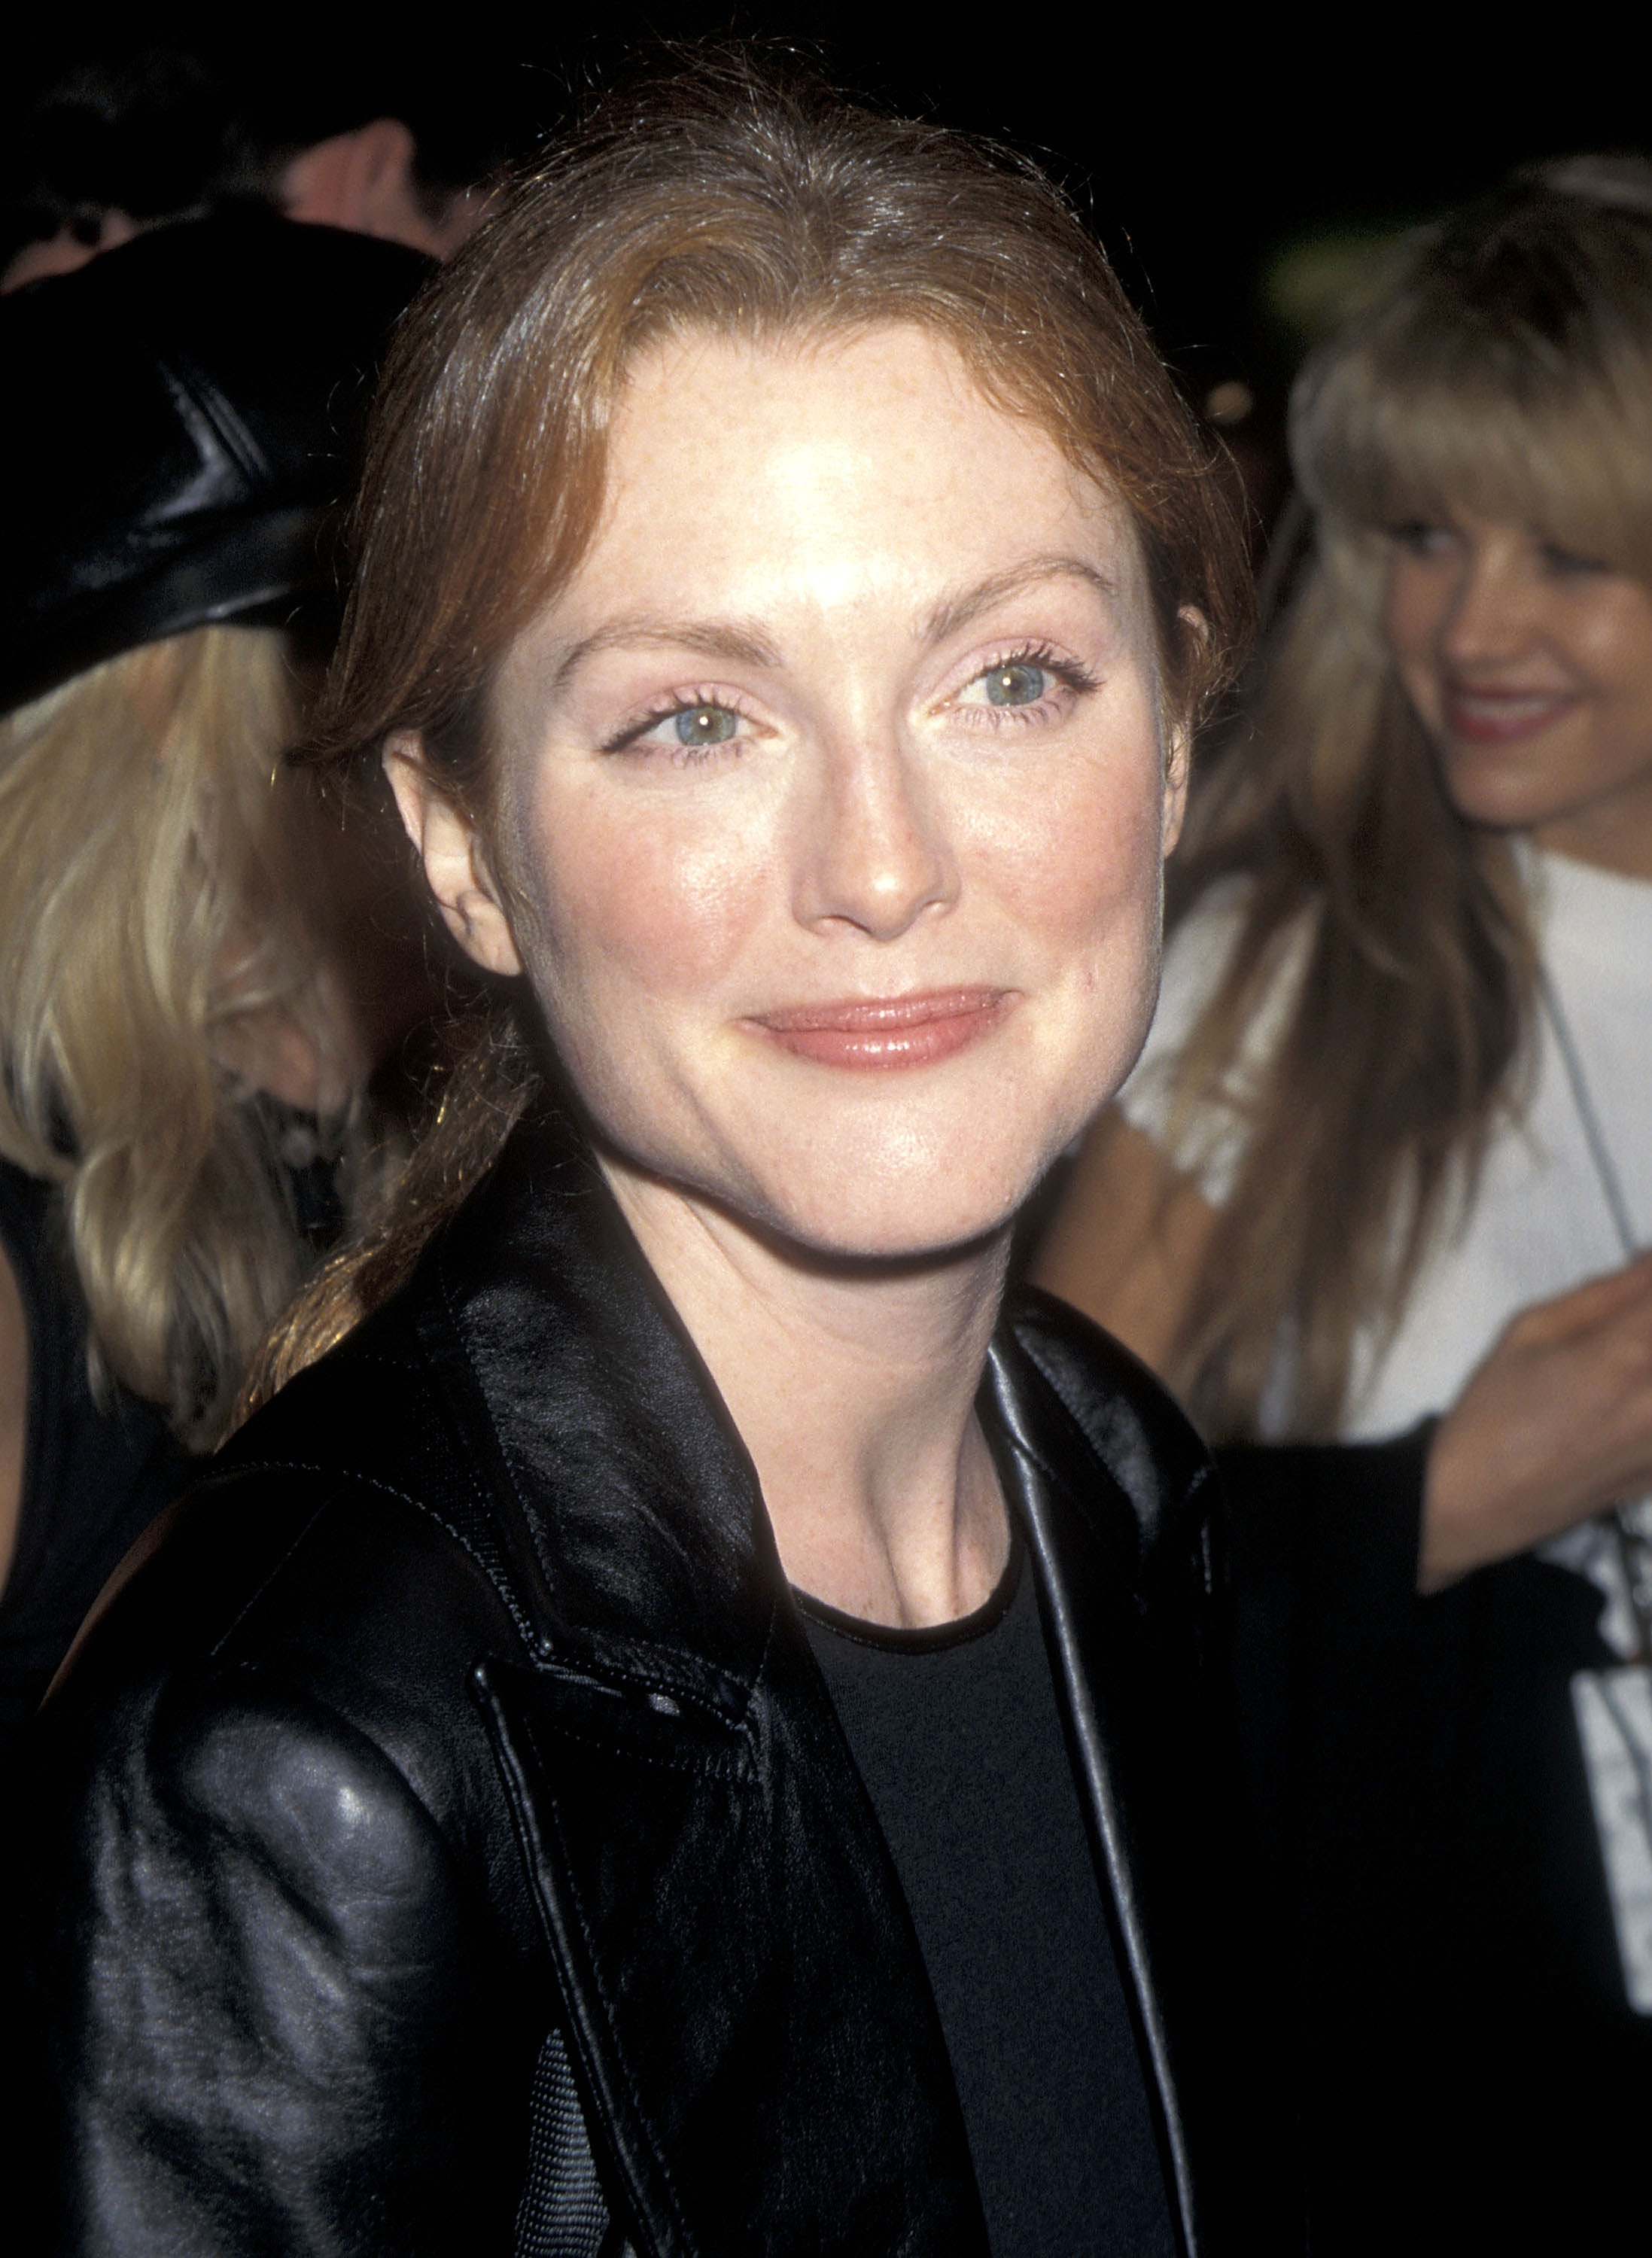 Julianne Moore at the Planet Hollywood grand opening celebration in Beverly Hills, California on September 17, 1995 | Source: Getty Images